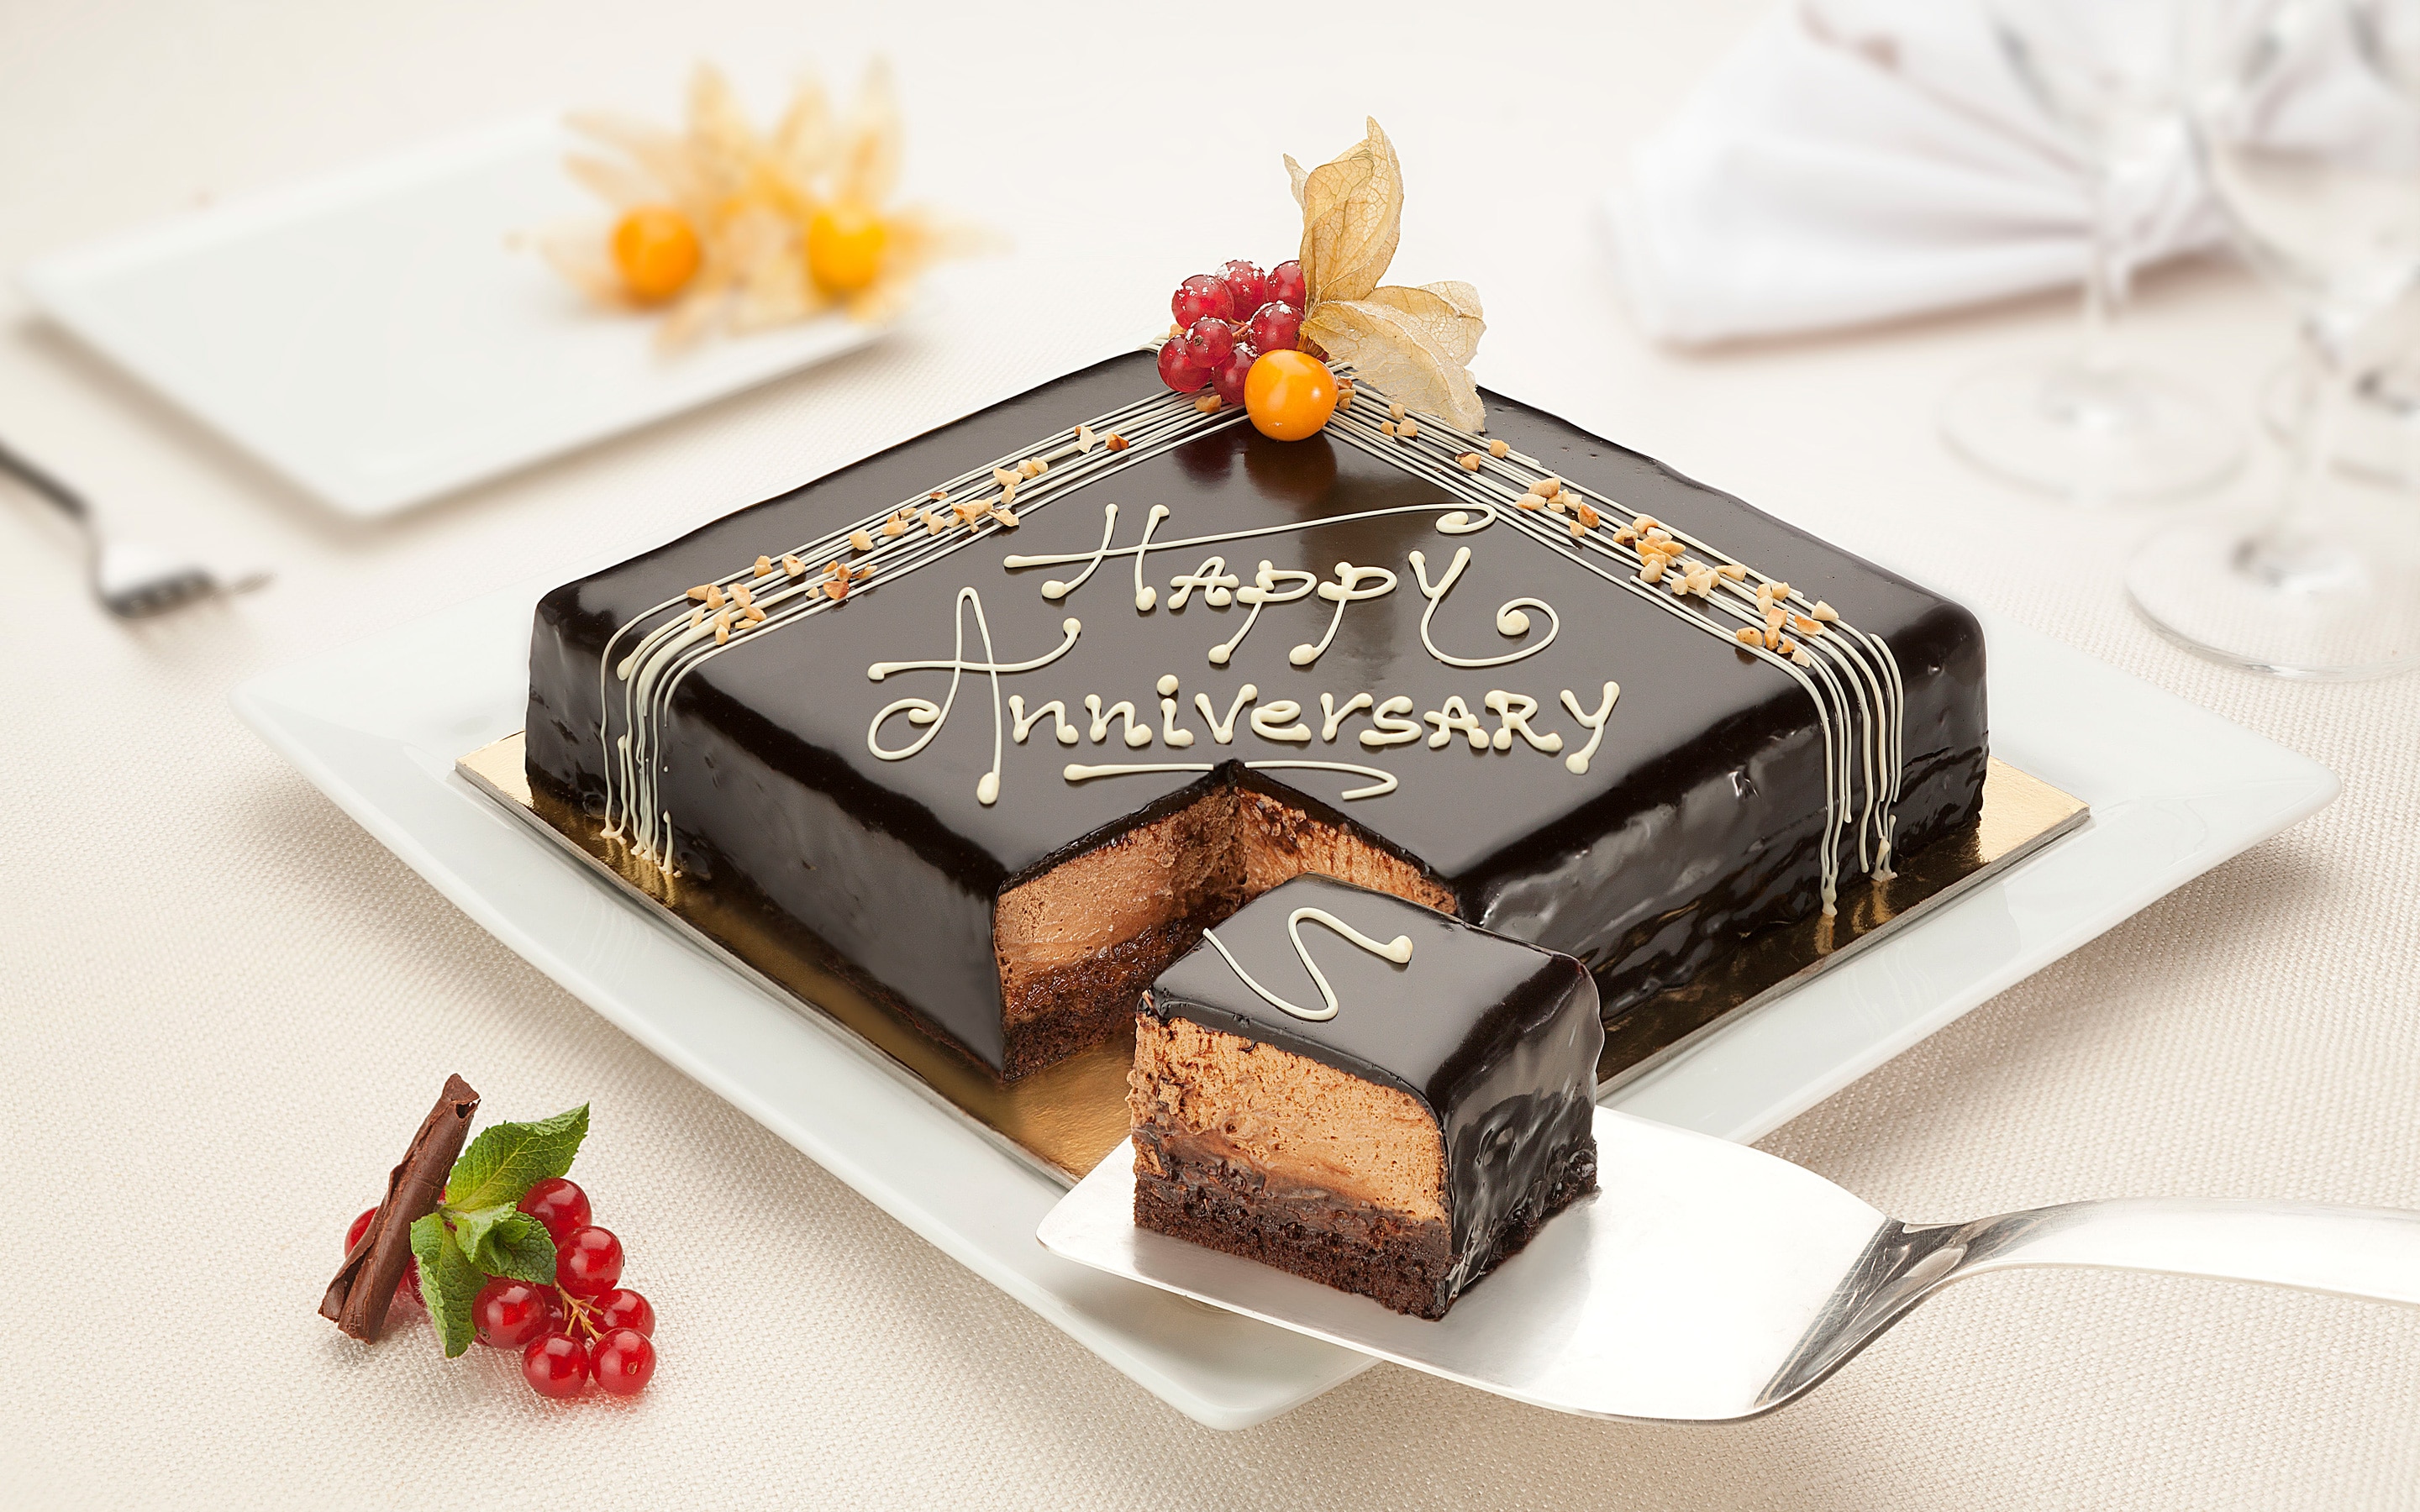 Special Occasions, Anniversary | MSC Cruises